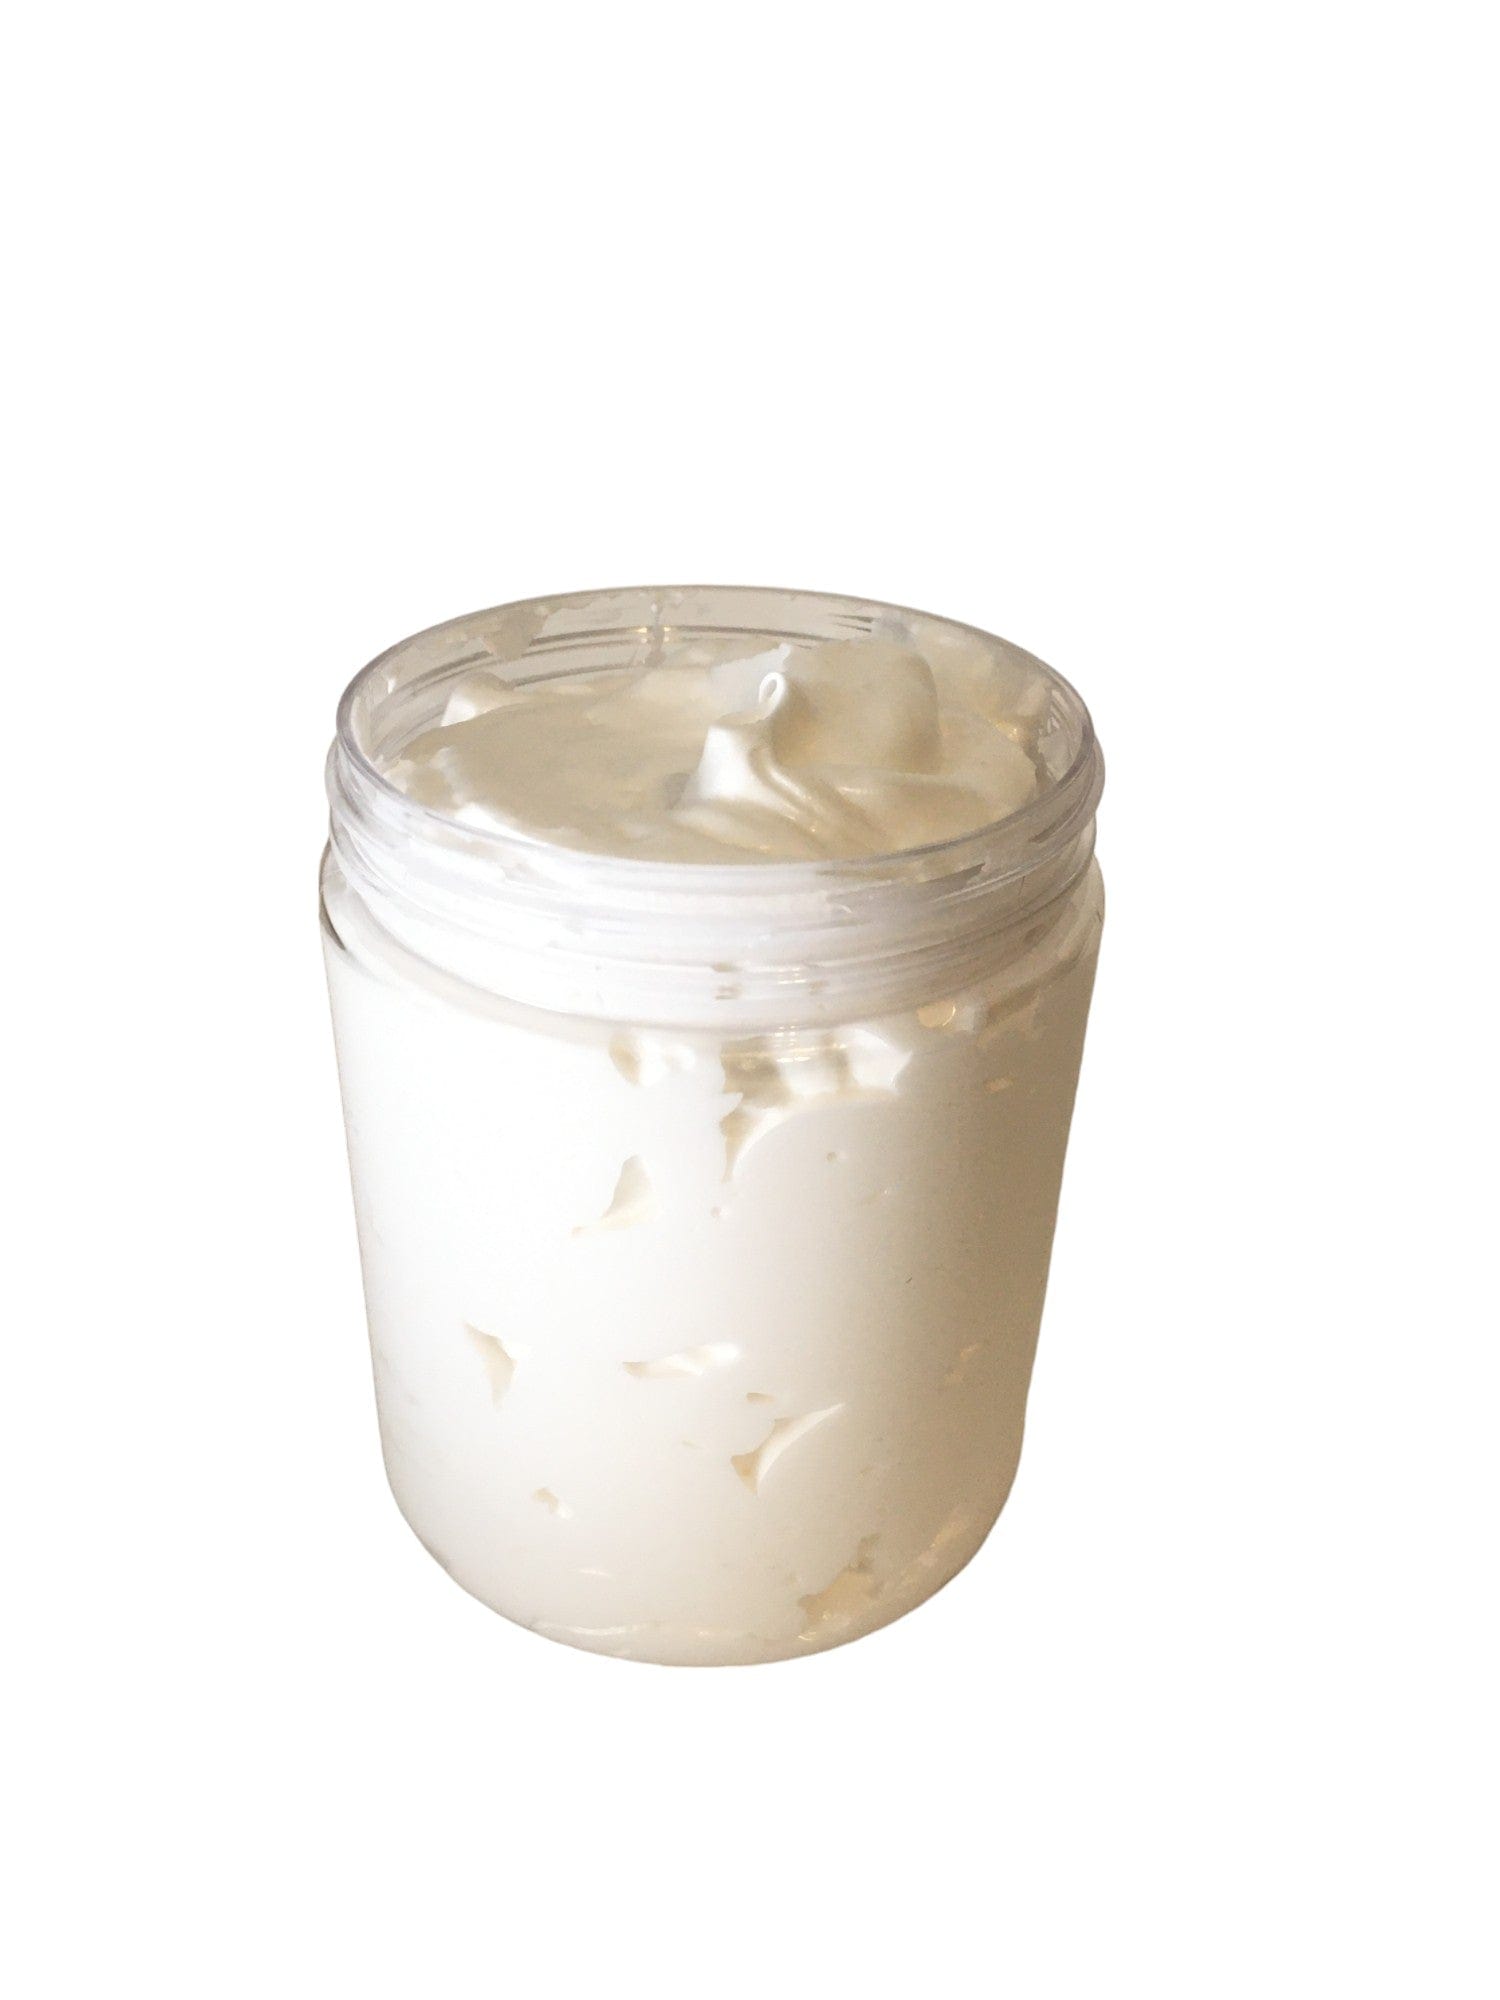 Unscented Whipped Soap